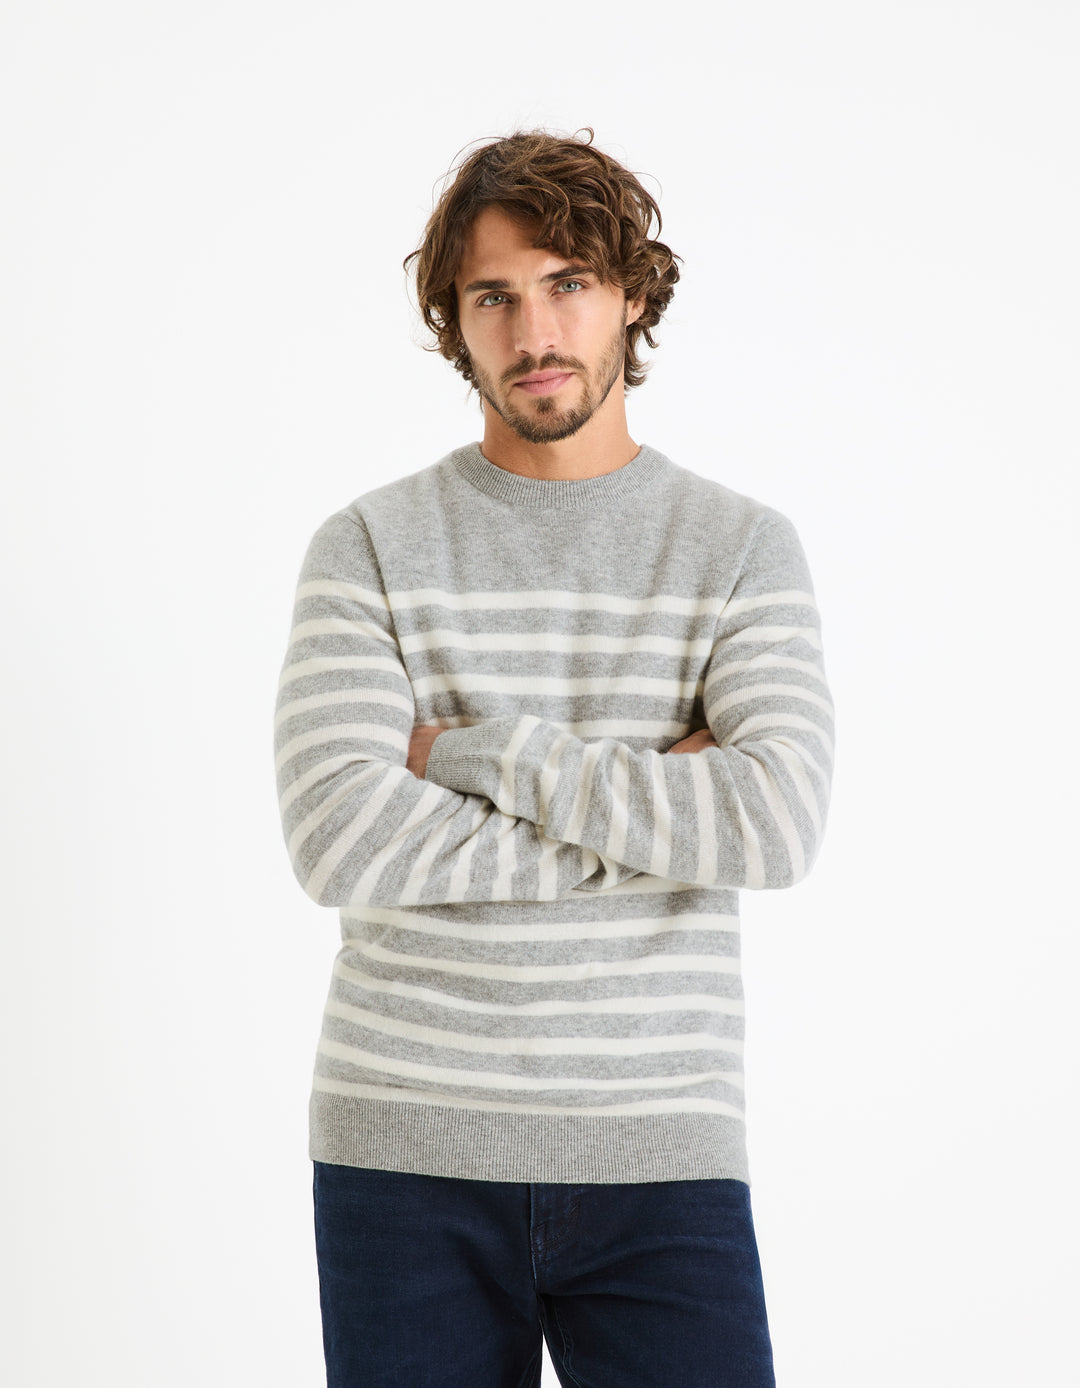 Unisex - Knitted - Sweater - Long sleeves